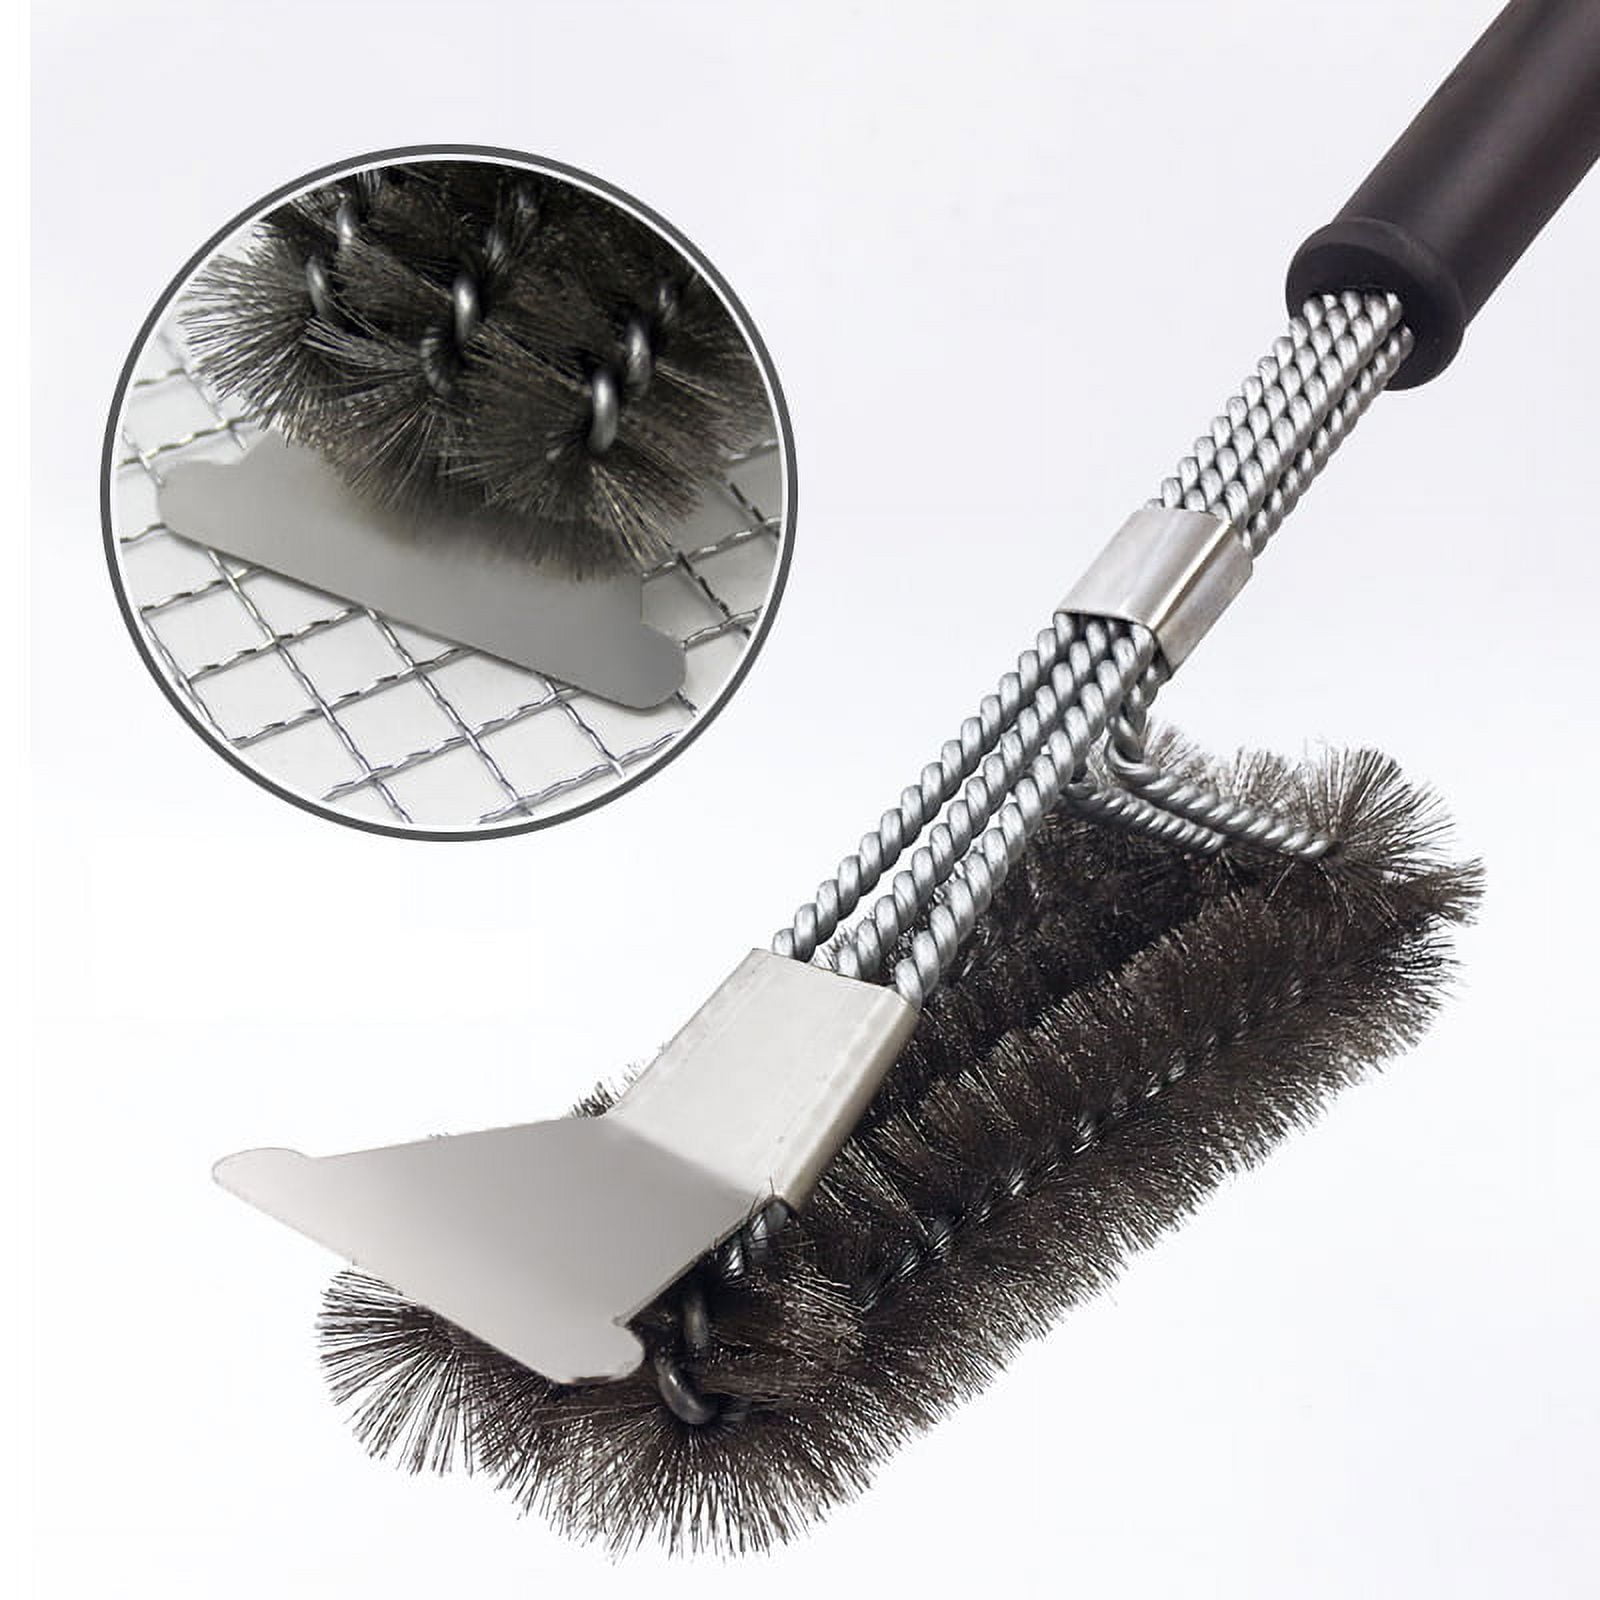 HEQUSIGNS 3 Pcs BBQ Grill Brush, Premium Stainless Steel Grill